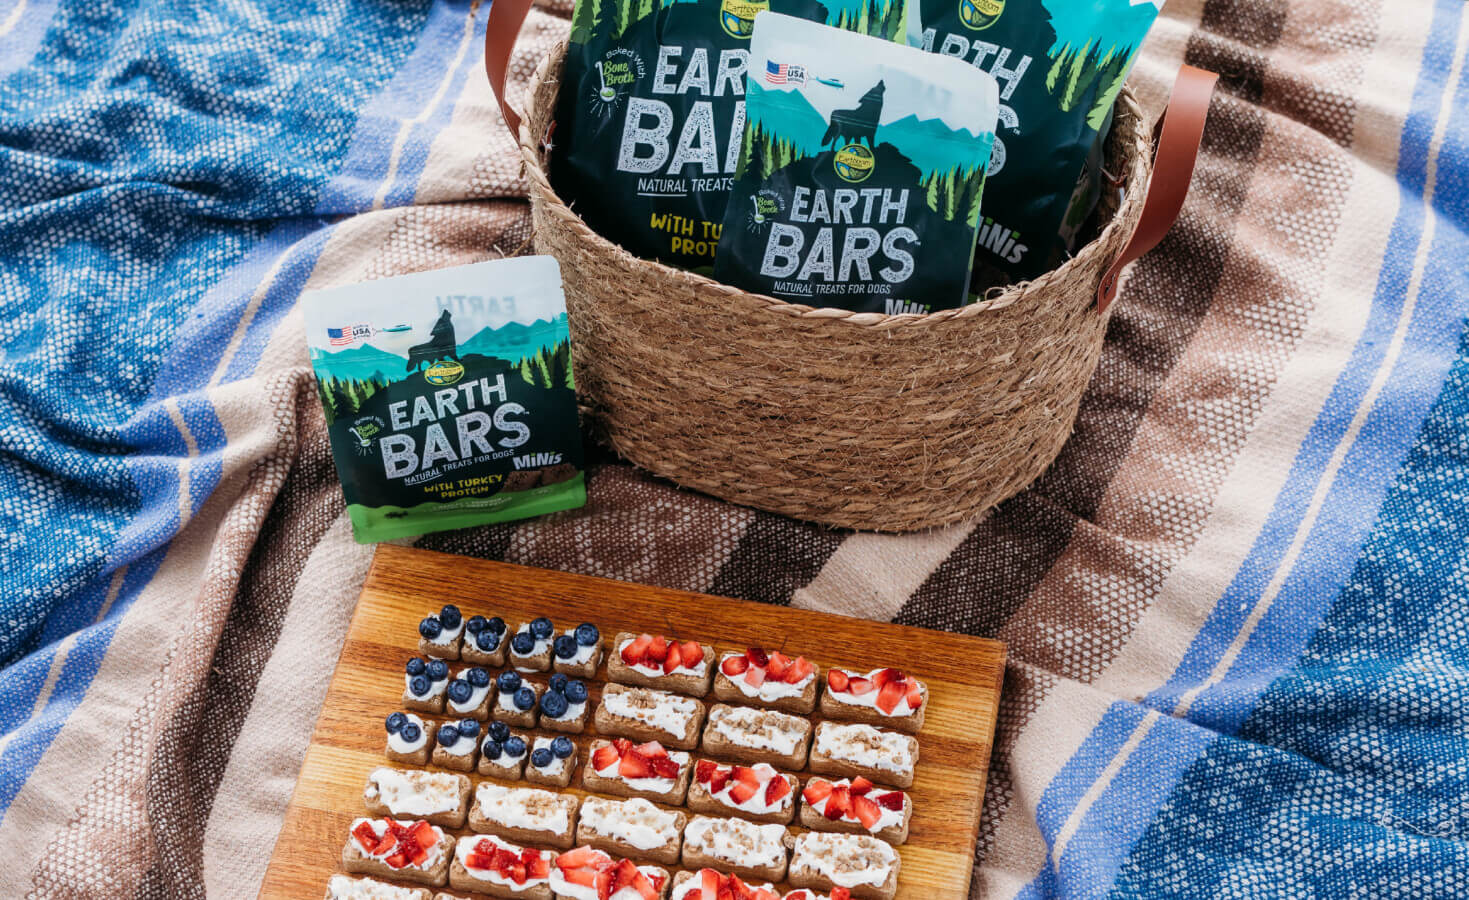 Basket full of EarthBars sits next to an American flag made out of EarthBars